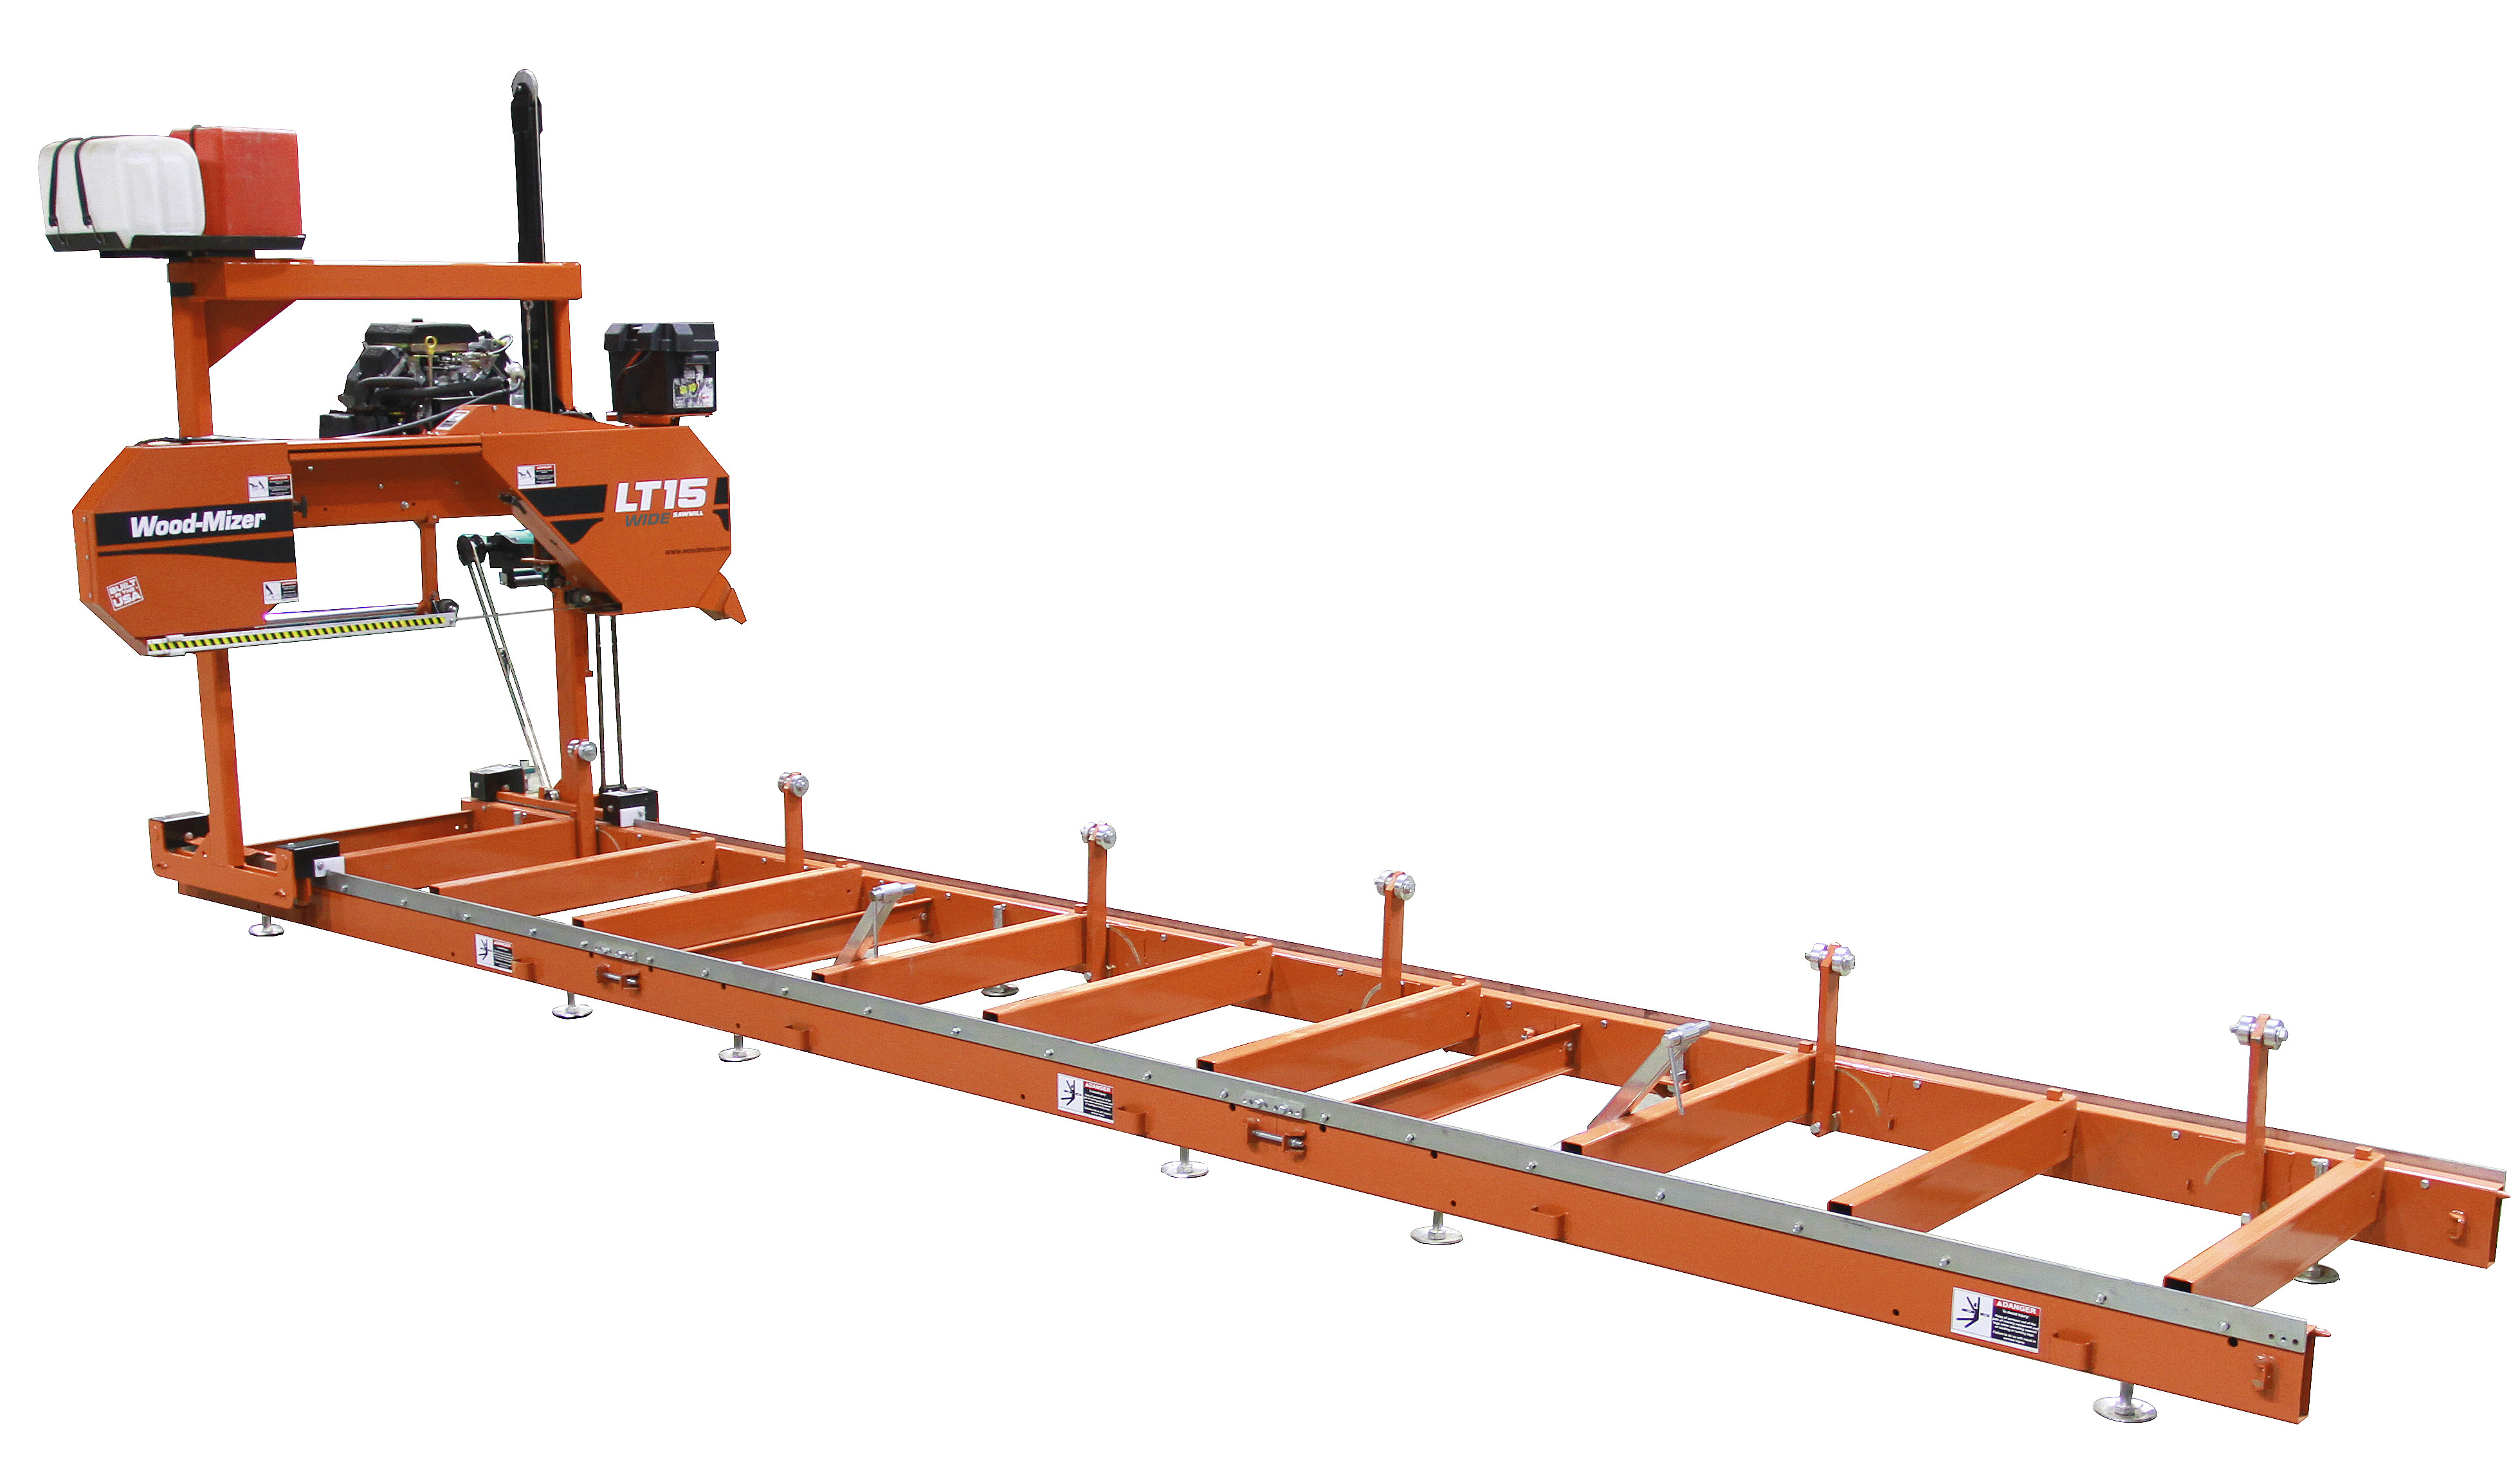 Wood-Mizer offers 12 models of portable sawmills including the new Wood-Mizer LT15WIDE sawmill.